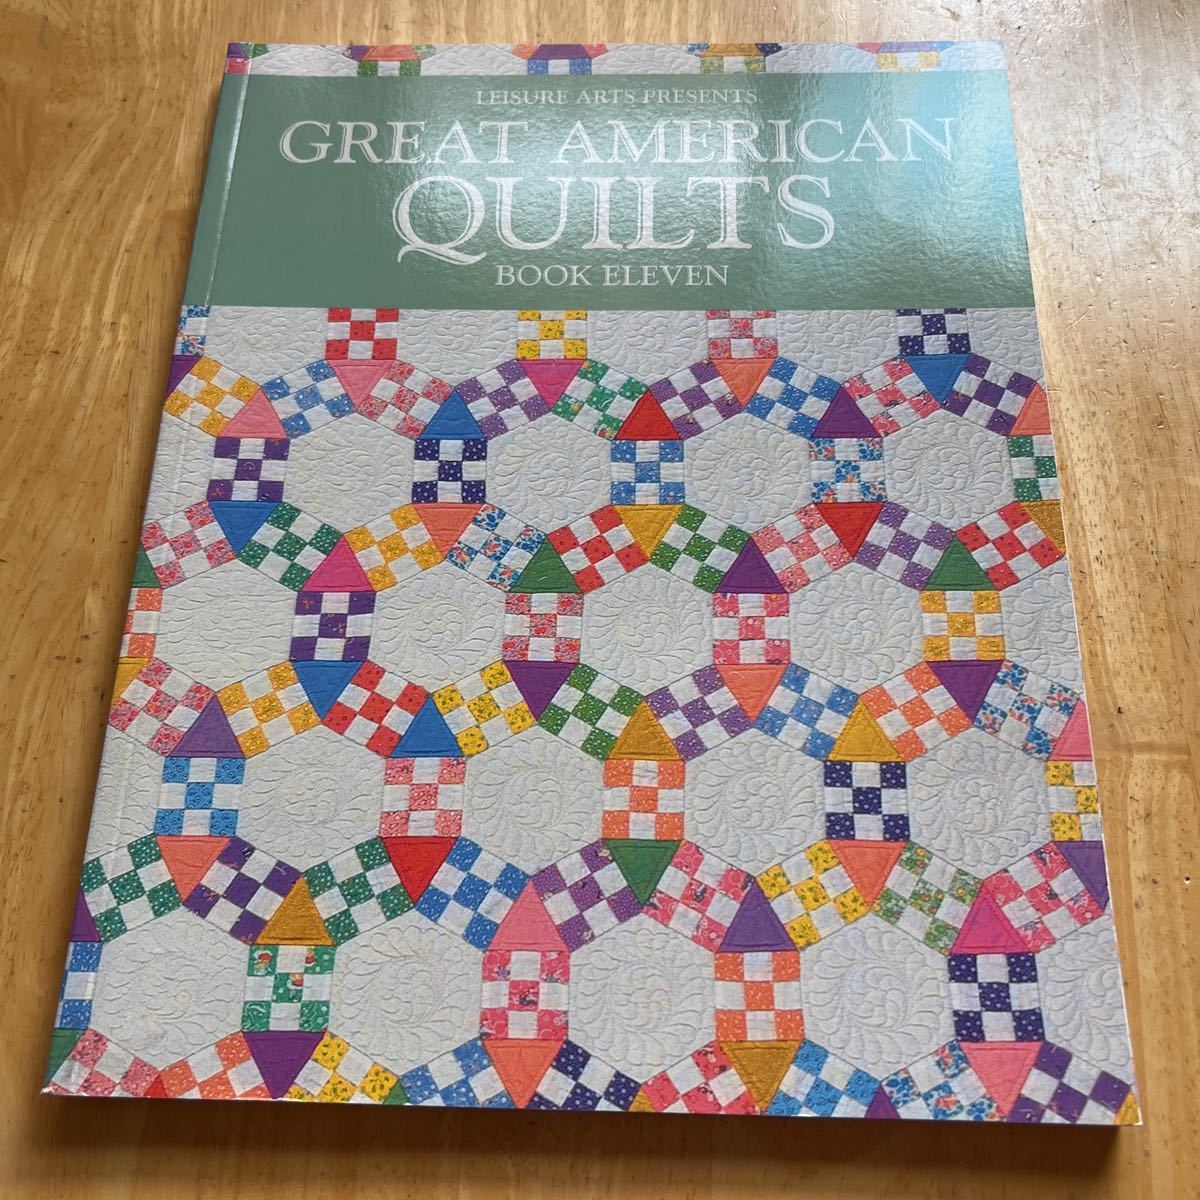 GREAT AMERICAN QUILTS BOOK ELEVEN 洋書 キルトの画像1